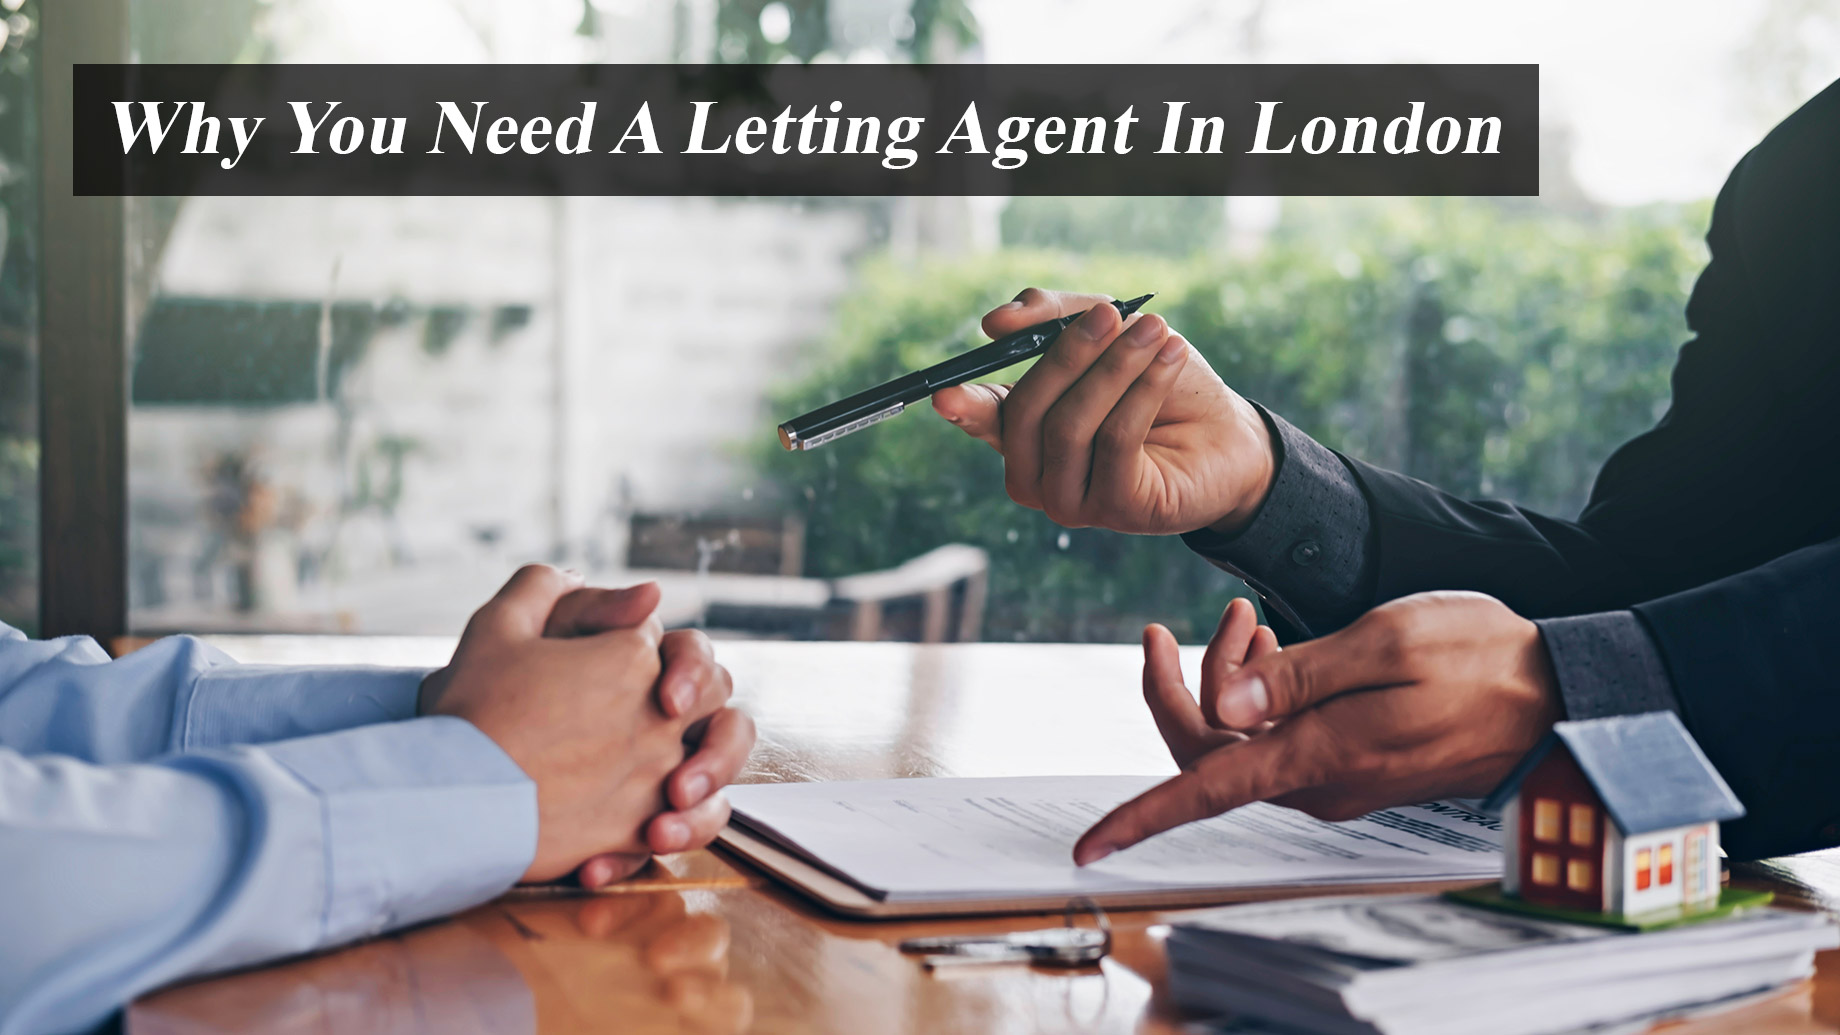 Why You Need A Letting Agent In London